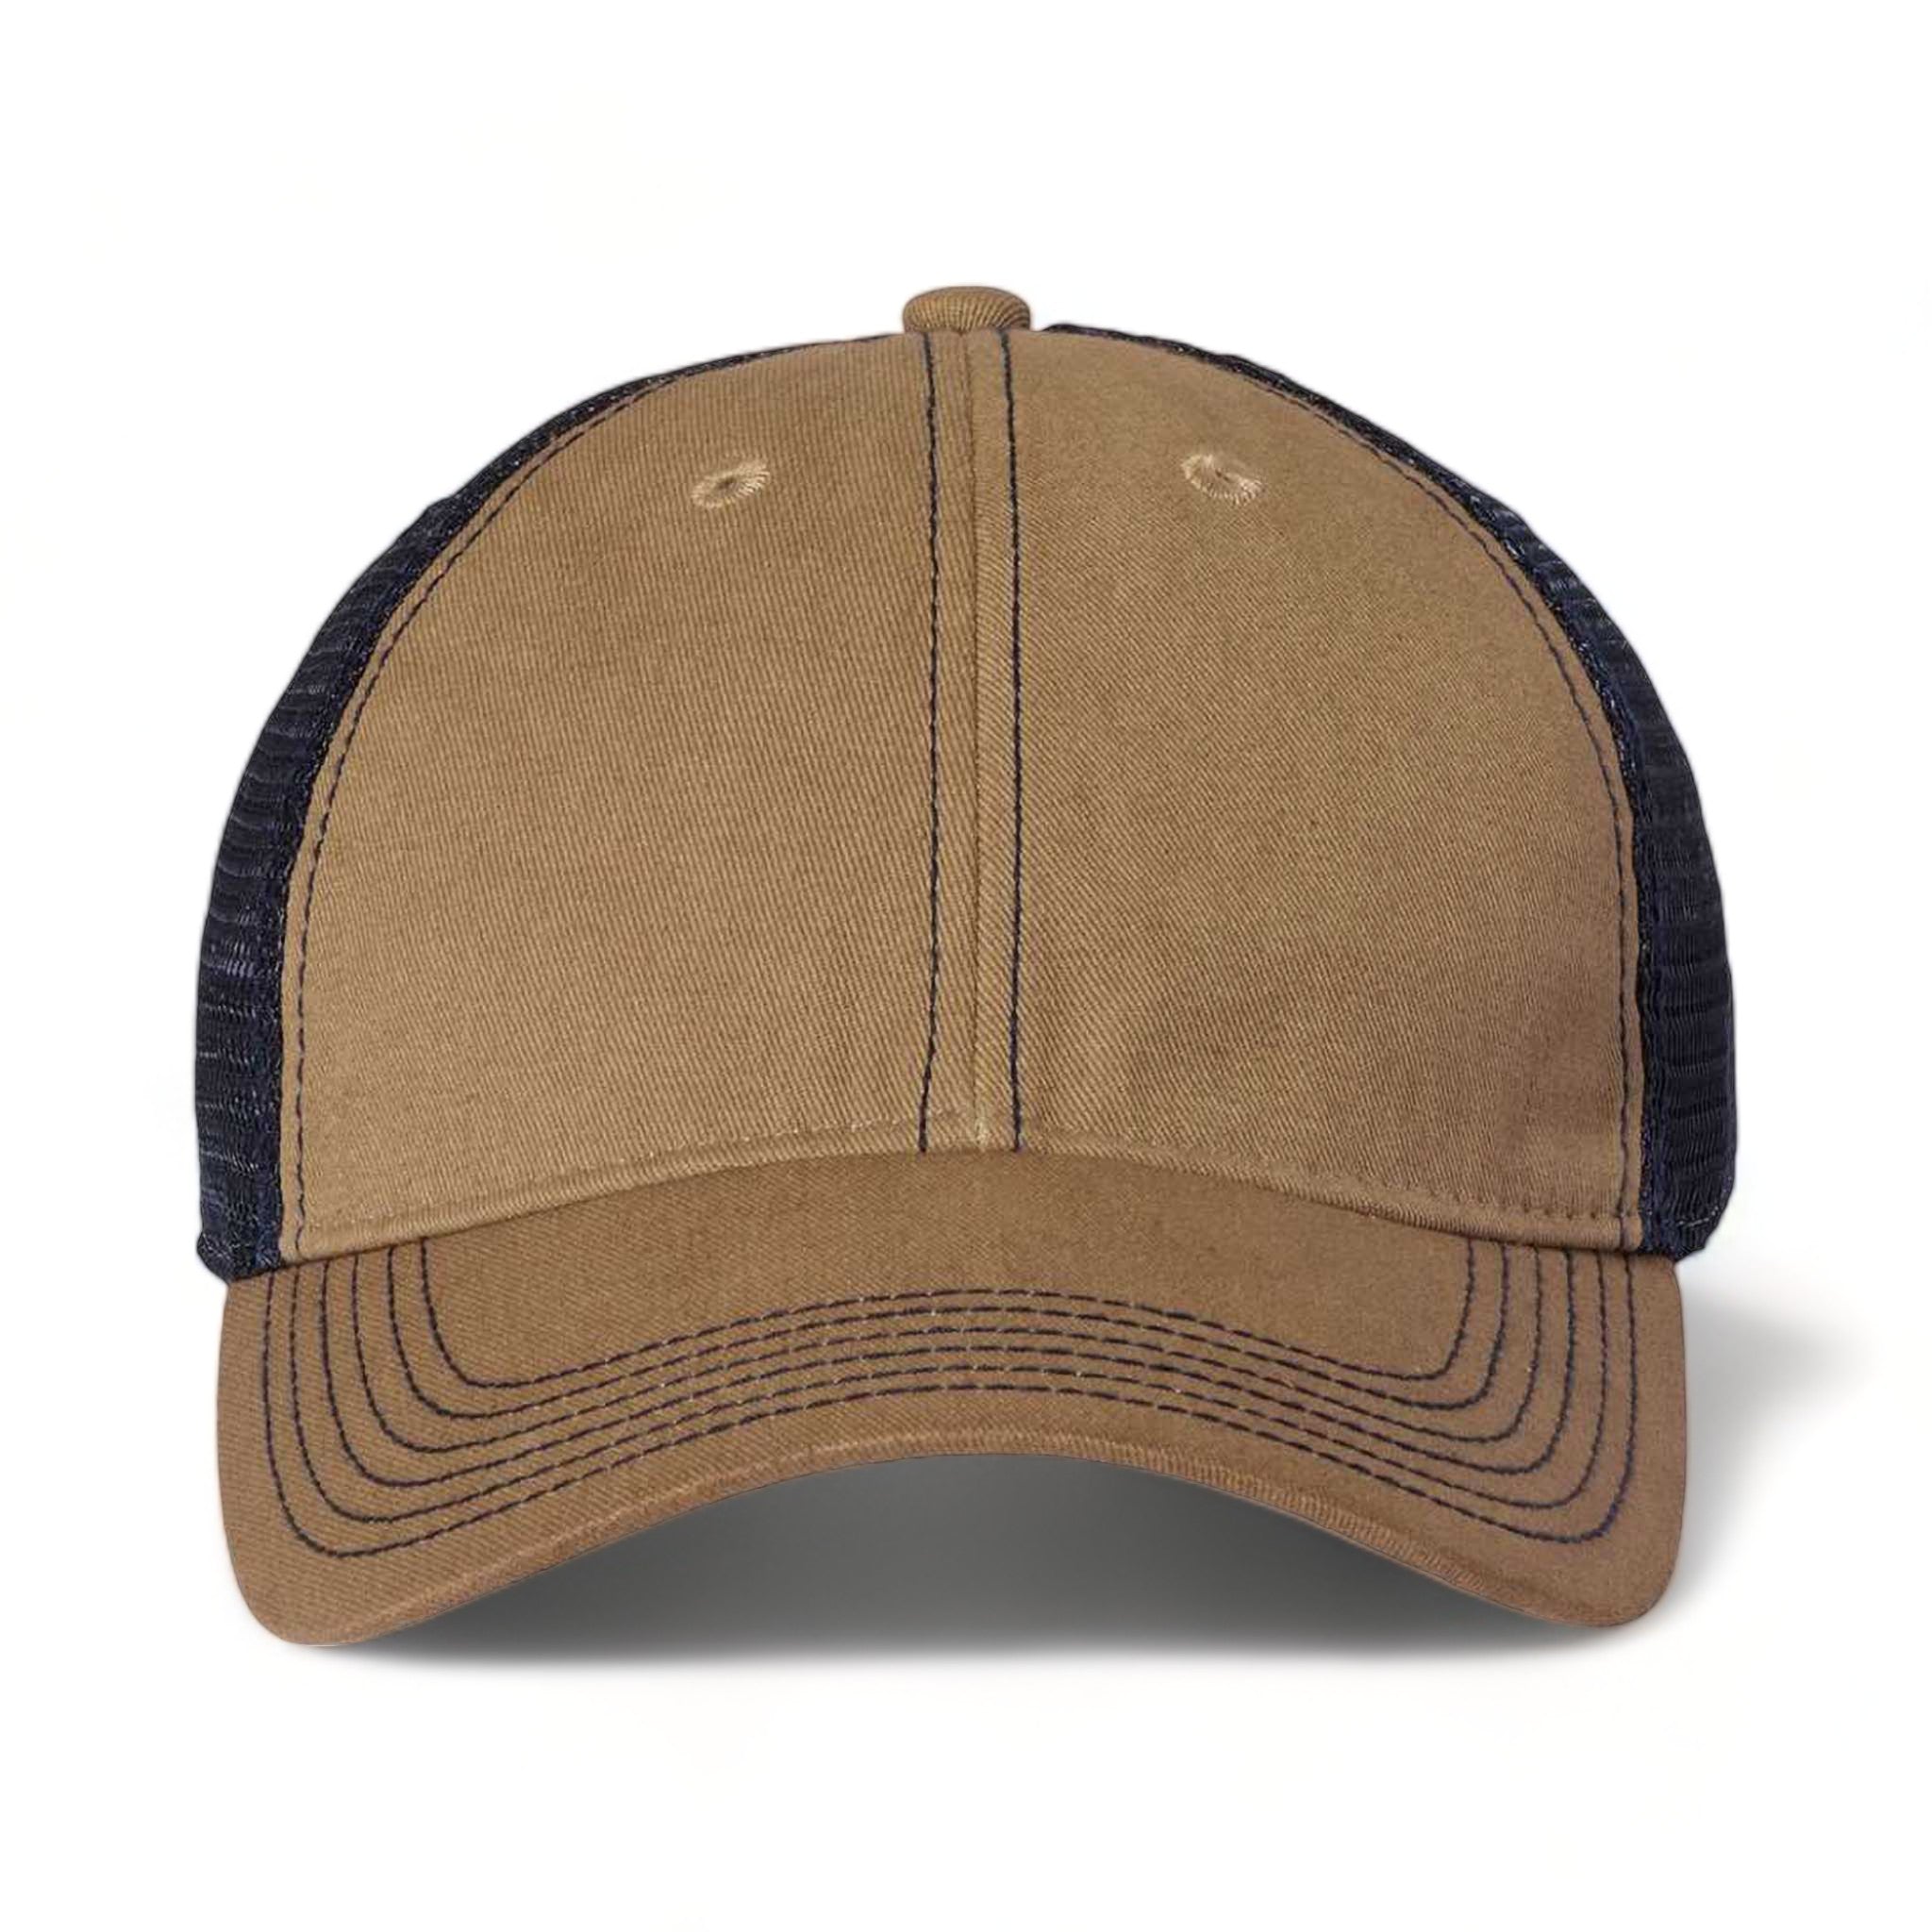 Front view of LEGACY OFA custom hat in khaki and navy